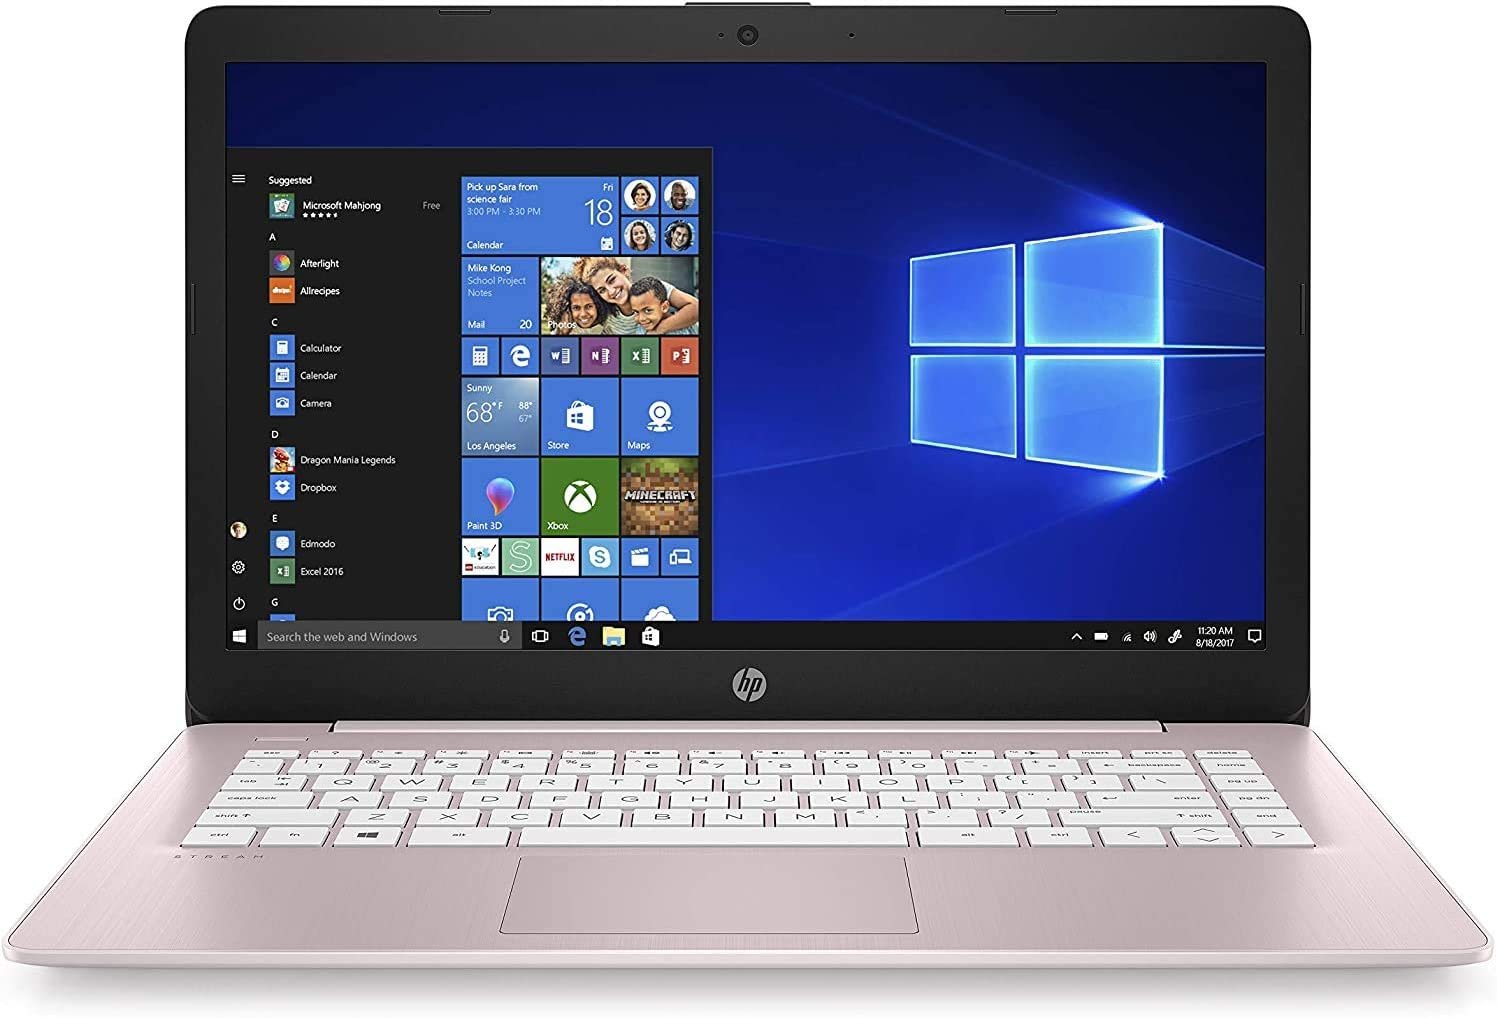 HP Stream 14 inches HD Laptop